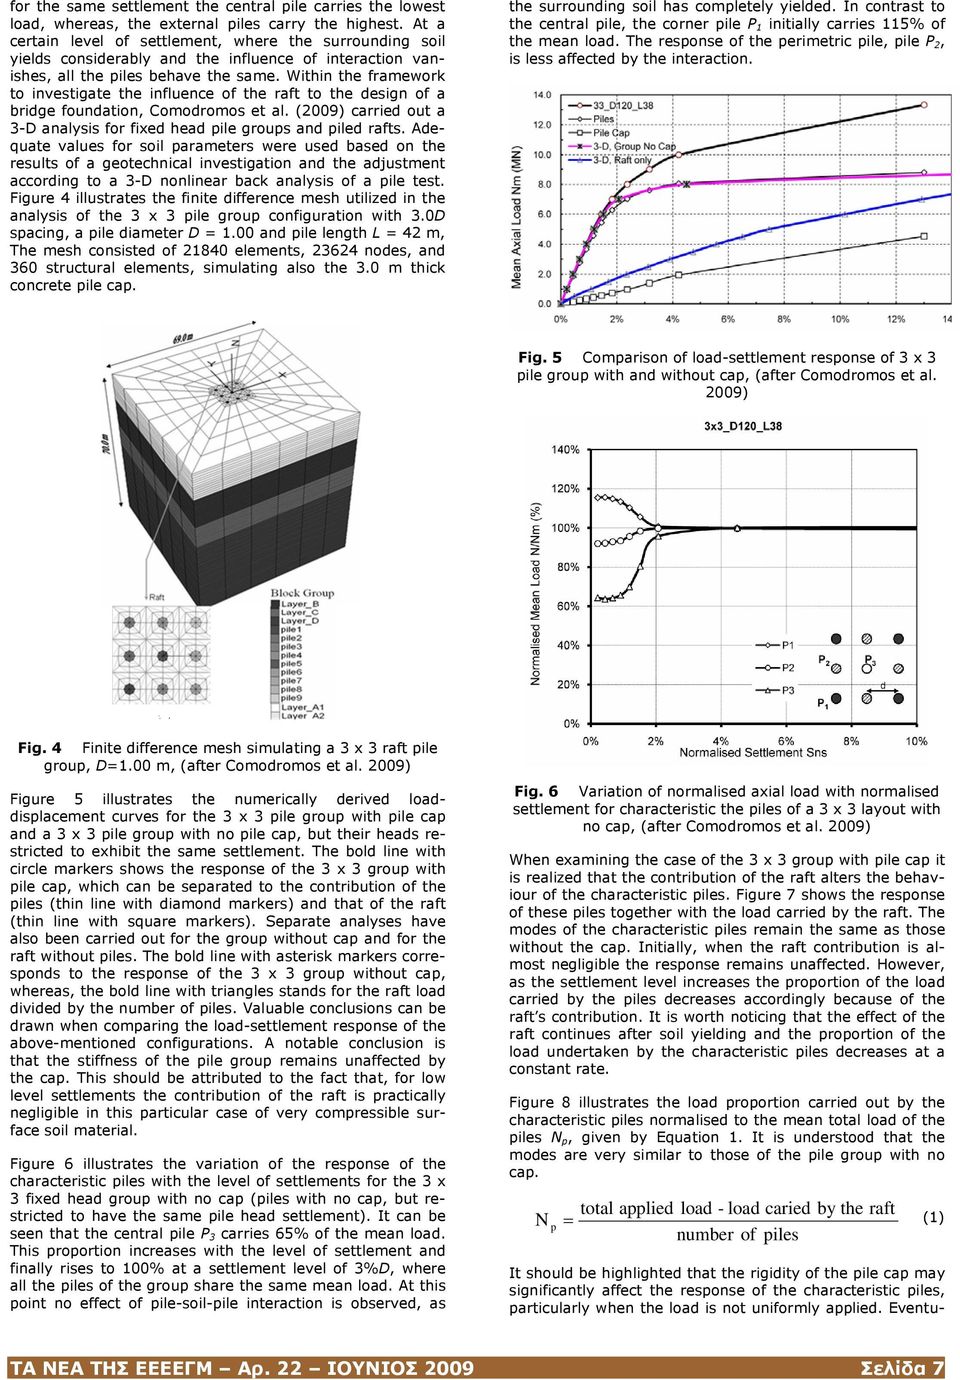 Within the framework to investigate the influence of the raft to the design of a bridge foundation, Comodromos et al. (2009) carried out a 3-D analysis for fixed head pile groups and piled rafts.